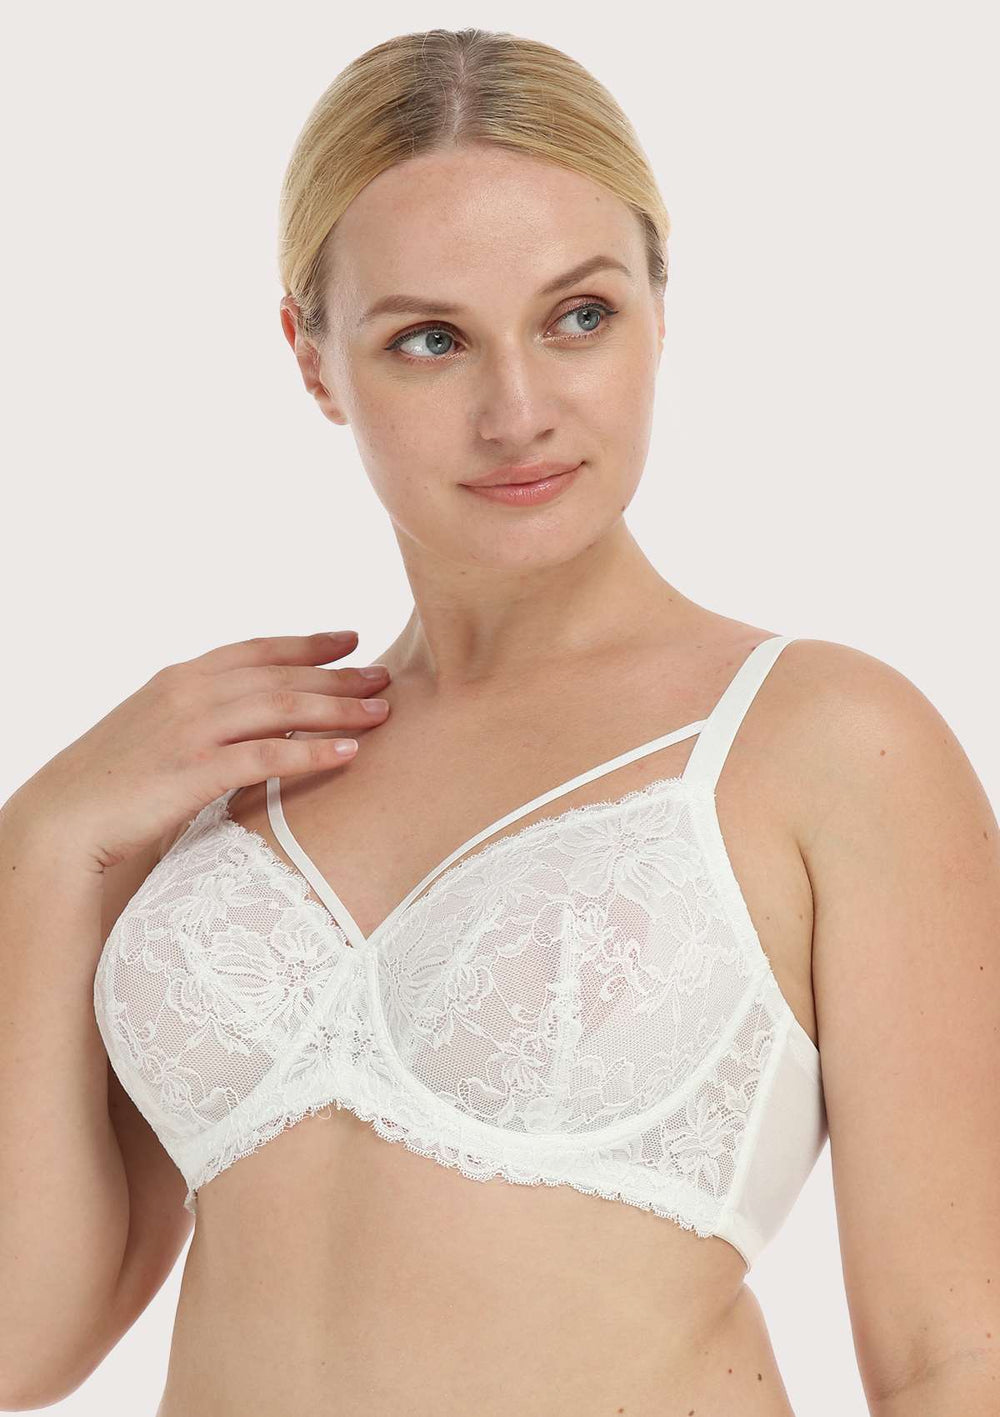 Iheyi 6 Pieces Lace Plain Unlined Full Cup Wired No Padding Bra